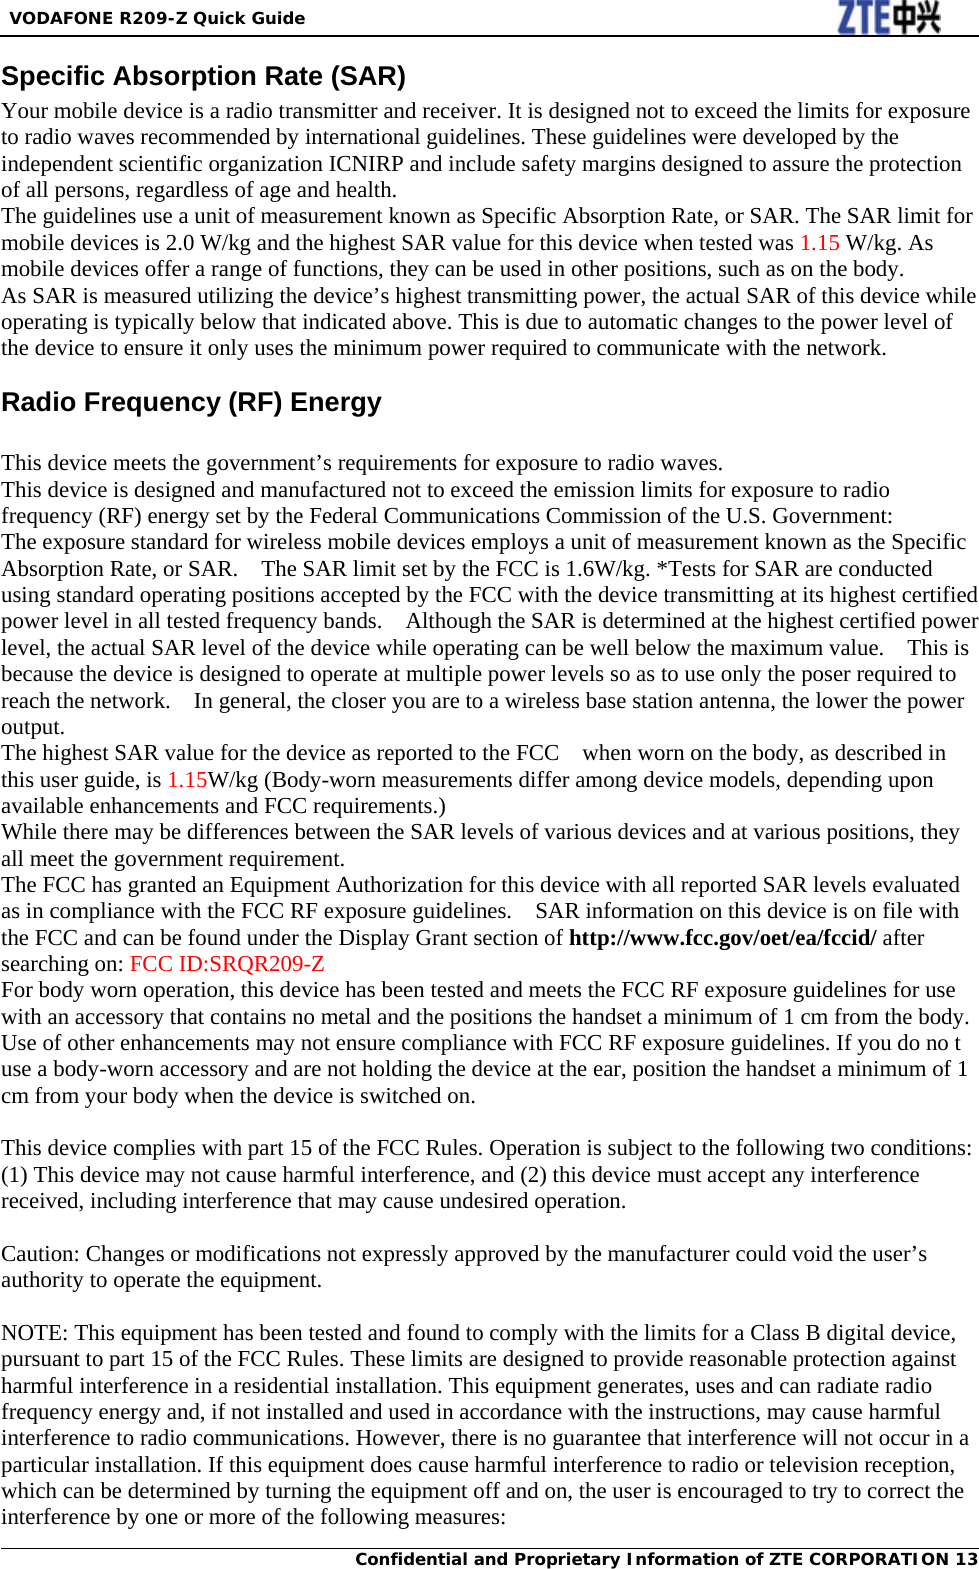  VODAFONE R209-Z Quick Guide Confidential and Proprietary Information of ZTE CORPORATION 13Specific Absorption Rate (SAR)                                                   Your mobile device is a radio transmitter and receiver. It is designed not to exceed the limits for exposure to radio waves recommended by international guidelines. These guidelines were developed by the independent scientific organization ICNIRP and include safety margins designed to assure the protection of all persons, regardless of age and health. The guidelines use a unit of measurement known as Specific Absorption Rate, or SAR. The SAR limit for mobile devices is 2.0 W/kg and the highest SAR value for this device when tested was 1.15 W/kg. As mobile devices offer a range of functions, they can be used in other positions, such as on the body. As SAR is measured utilizing the device’s highest transmitting power, the actual SAR of this device while operating is typically below that indicated above. This is due to automatic changes to the power level of the device to ensure it only uses the minimum power required to communicate with the network. Radio Frequency (RF) Energy    This device meets the government’s requirements for exposure to radio waves.   This device is designed and manufactured not to exceed the emission limits for exposure to radio frequency (RF) energy set by the Federal Communications Commission of the U.S. Government:   The exposure standard for wireless mobile devices employs a unit of measurement known as the Specific Absorption Rate, or SAR.    The SAR limit set by the FCC is 1.6W/kg. *Tests for SAR are conducted using standard operating positions accepted by the FCC with the device transmitting at its highest certified power level in all tested frequency bands.    Although the SAR is determined at the highest certified power level, the actual SAR level of the device while operating can be well below the maximum value.    This is because the device is designed to operate at multiple power levels so as to use only the poser required to reach the network.    In general, the closer you are to a wireless base station antenna, the lower the power output.  The highest SAR value for the device as reported to the FCC    when worn on the body, as described in this user guide, is 1.15W/kg (Body-worn measurements differ among device models, depending upon available enhancements and FCC requirements.)   While there may be differences between the SAR levels of various devices and at various positions, they all meet the government requirement.   The FCC has granted an Equipment Authorization for this device with all reported SAR levels evaluated as in compliance with the FCC RF exposure guidelines.    SAR information on this device is on file with the FCC and can be found under the Display Grant section of http://www.fcc.gov/oet/ea/fccid/ after searching on: FCC ID:SRQR209-Z   For body worn operation, this device has been tested and meets the FCC RF exposure guidelines for use with an accessory that contains no metal and the positions the handset a minimum of 1 cm from the body. Use of other enhancements may not ensure compliance with FCC RF exposure guidelines. If you do no t use a body-worn accessory and are not holding the device at the ear, position the handset a minimum of 1 cm from your body when the device is switched on.    This device complies with part 15 of the FCC Rules. Operation is subject to the following two conditions: (1) This device may not cause harmful interference, and (2) this device must accept any interference received, including interference that may cause undesired operation.      Caution: Changes or modifications not expressly approved by the manufacturer could void the user’s authority to operate the equipment.      NOTE: This equipment has been tested and found to comply with the limits for a Class B digital device, pursuant to part 15 of the FCC Rules. These limits are designed to provide reasonable protection against harmful interference in a residential installation. This equipment generates, uses and can radiate radio frequency energy and, if not installed and used in accordance with the instructions, may cause harmful interference to radio communications. However, there is no guarantee that interference will not occur in a particular installation. If this equipment does cause harmful interference to radio or television reception, which can be determined by turning the equipment off and on, the user is encouraged to try to correct the interference by one or more of the following measures:   